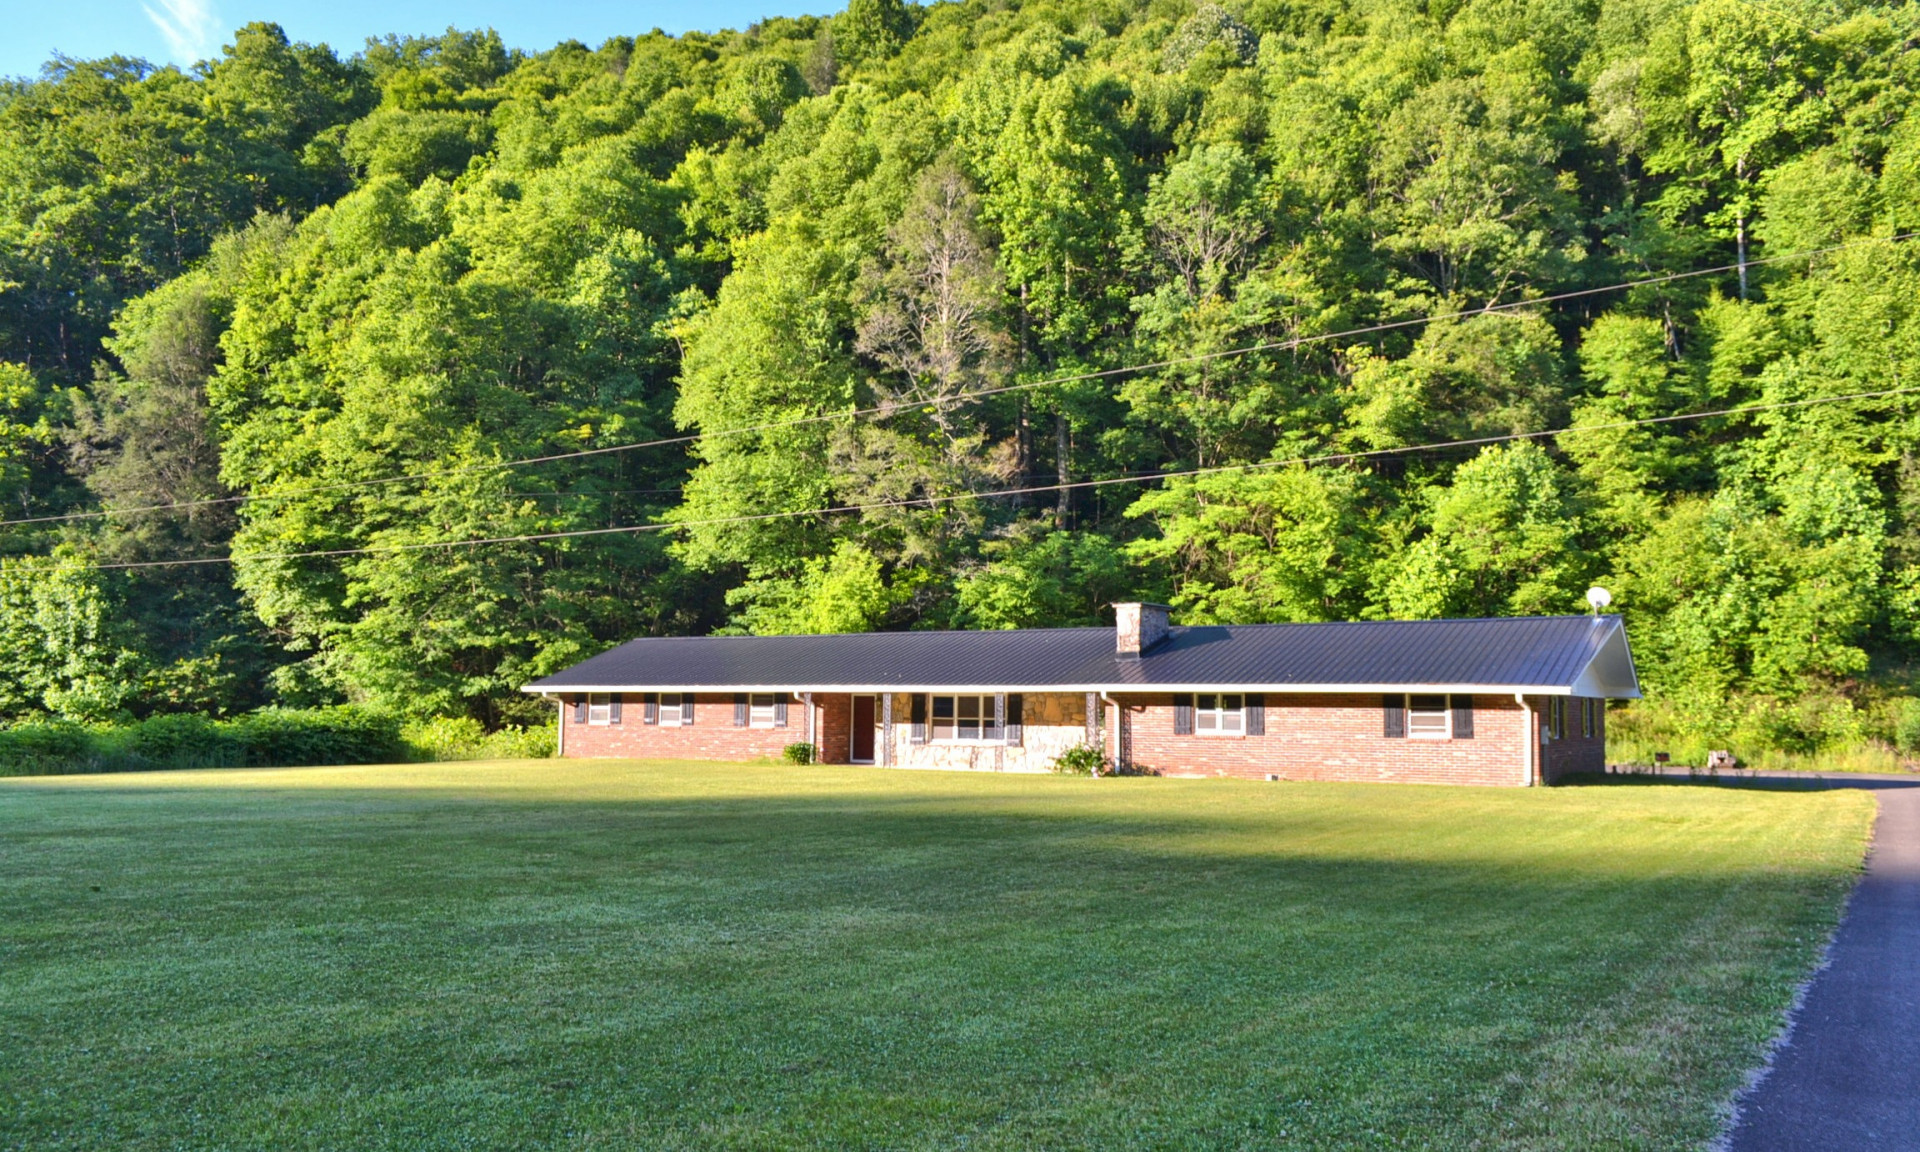 Enjoy creekfront living in this spacious ranch style home nestled on a 5+ acre setting on the banks of Big Wilson Creek in the Grayson Highlands  area of Grayson County.